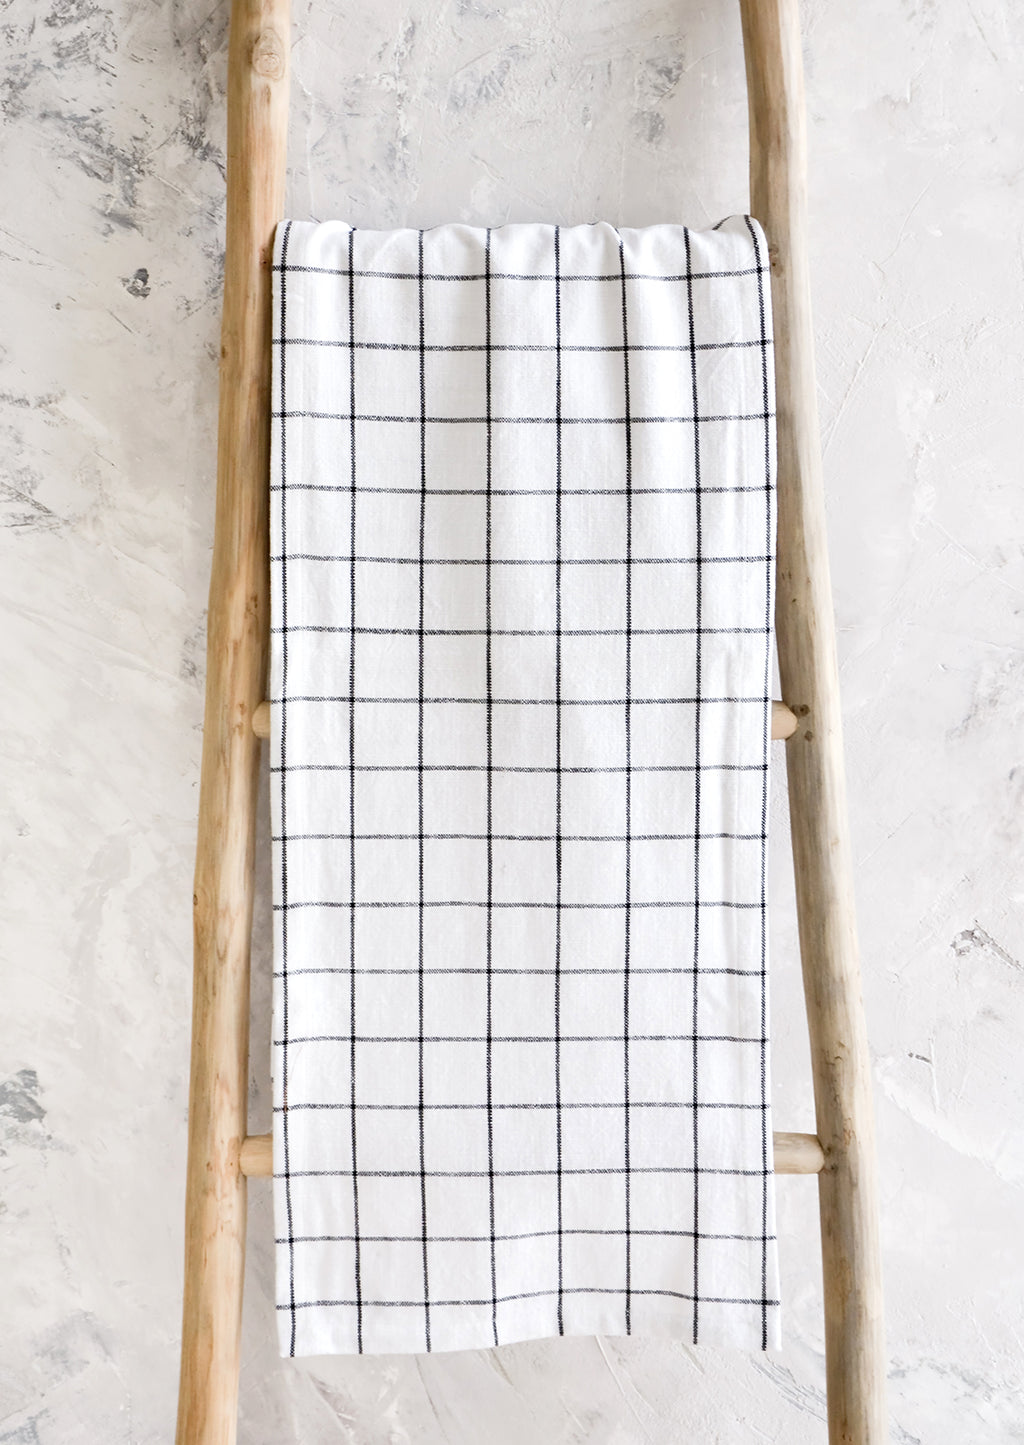 2: White cotton table runner with black grid check print, hanging on display ladder